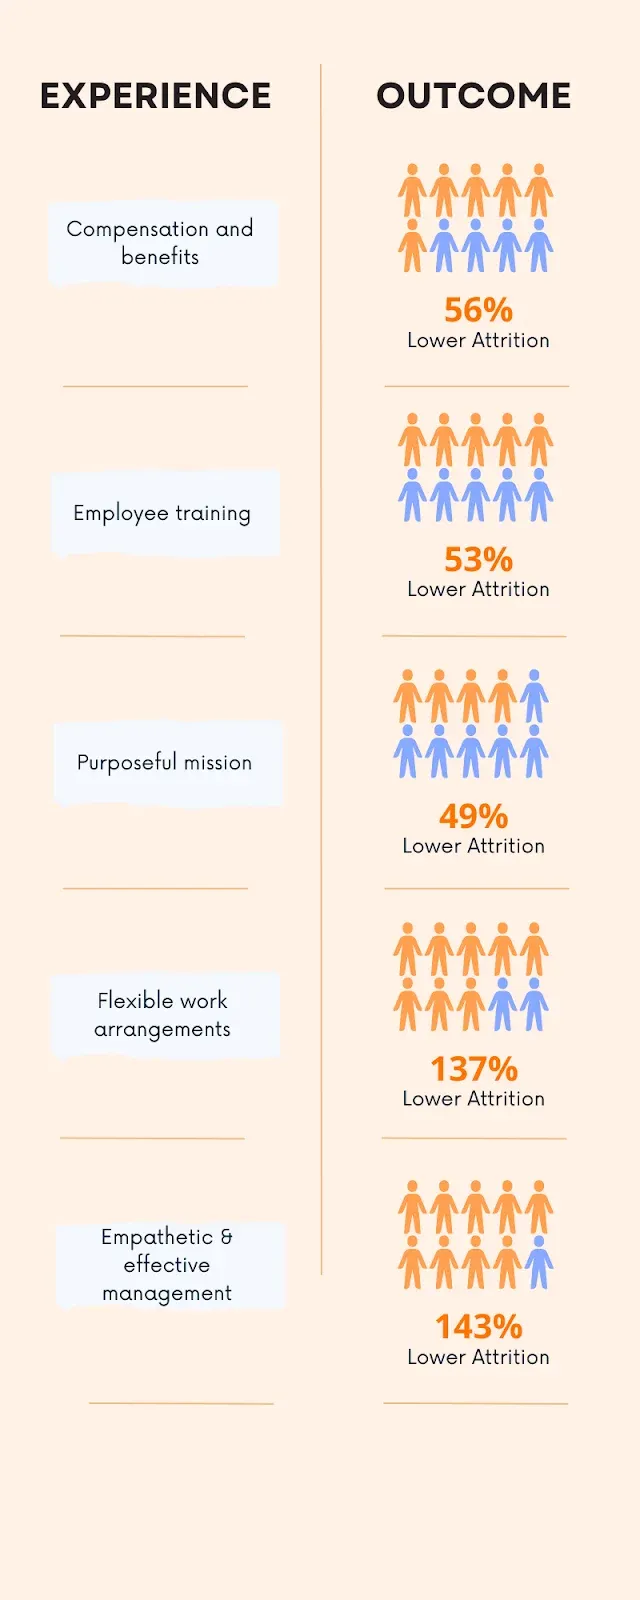 Source: LinkedIn, Global Talent Trends 2020business impact of good experience strategies